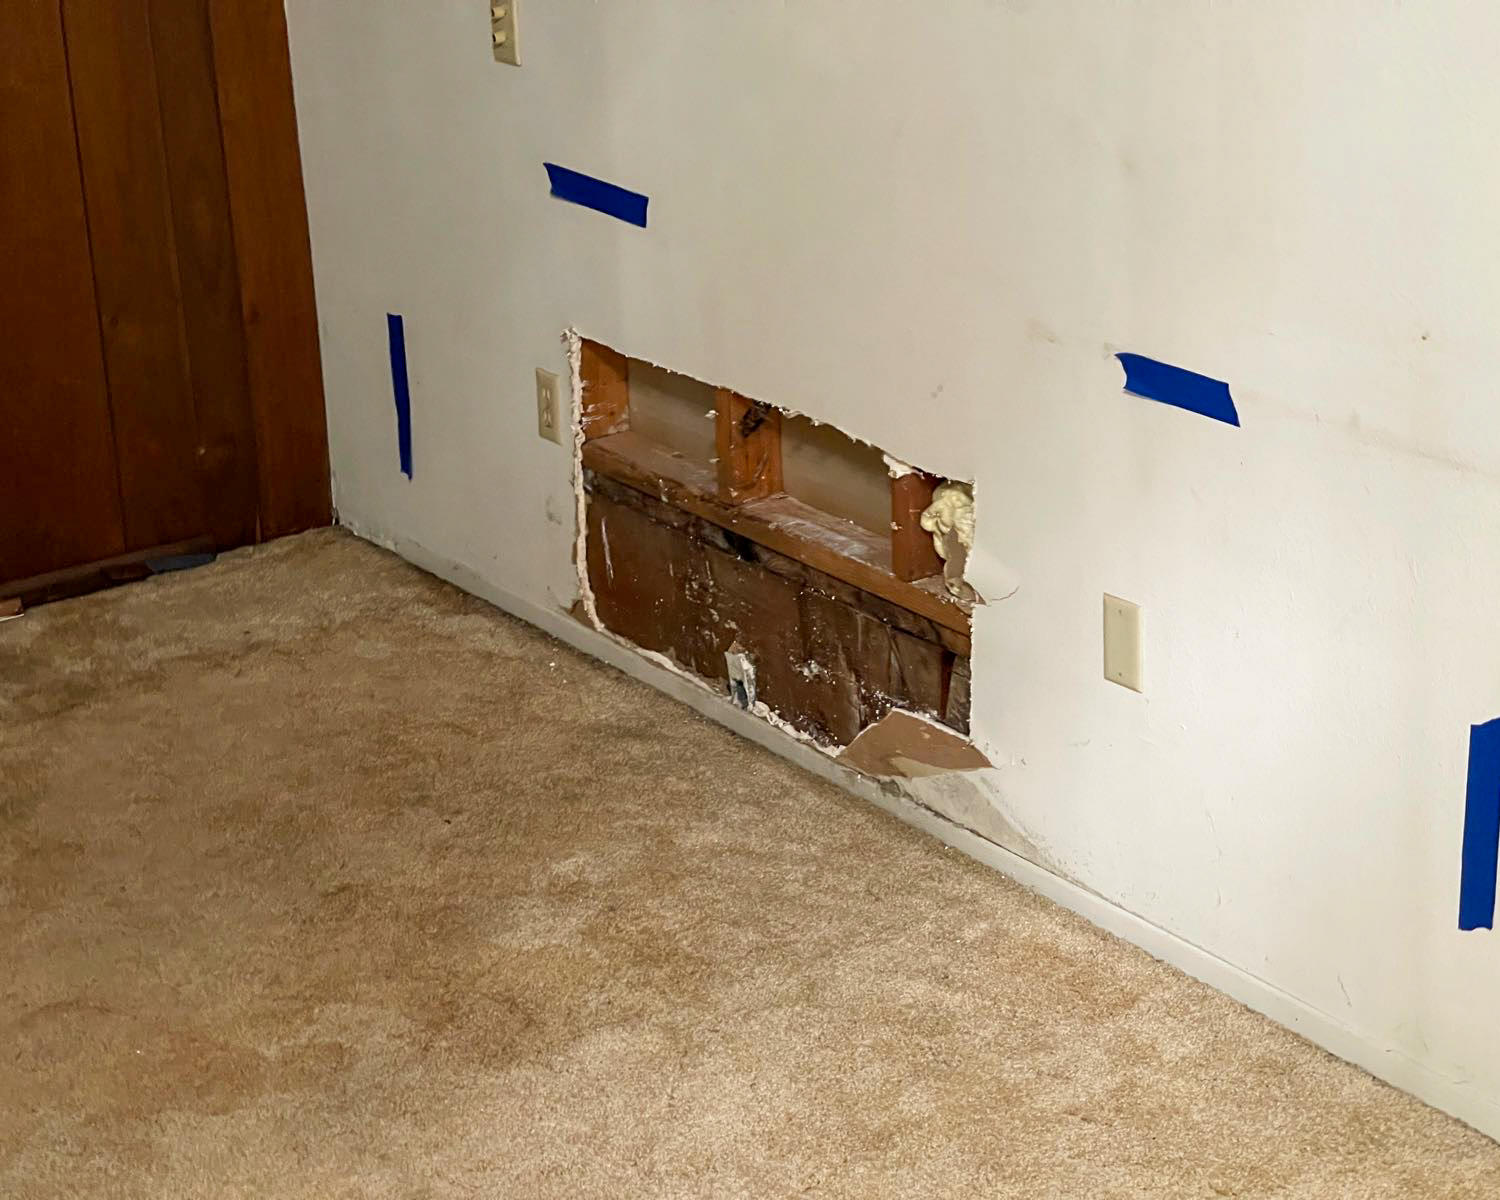 Do you know who you will call for your water damage cleanup and restoration needs in Olympia, WA? SERVPRO of Lacey is the answer, we have the expertise to help. Give us a call!